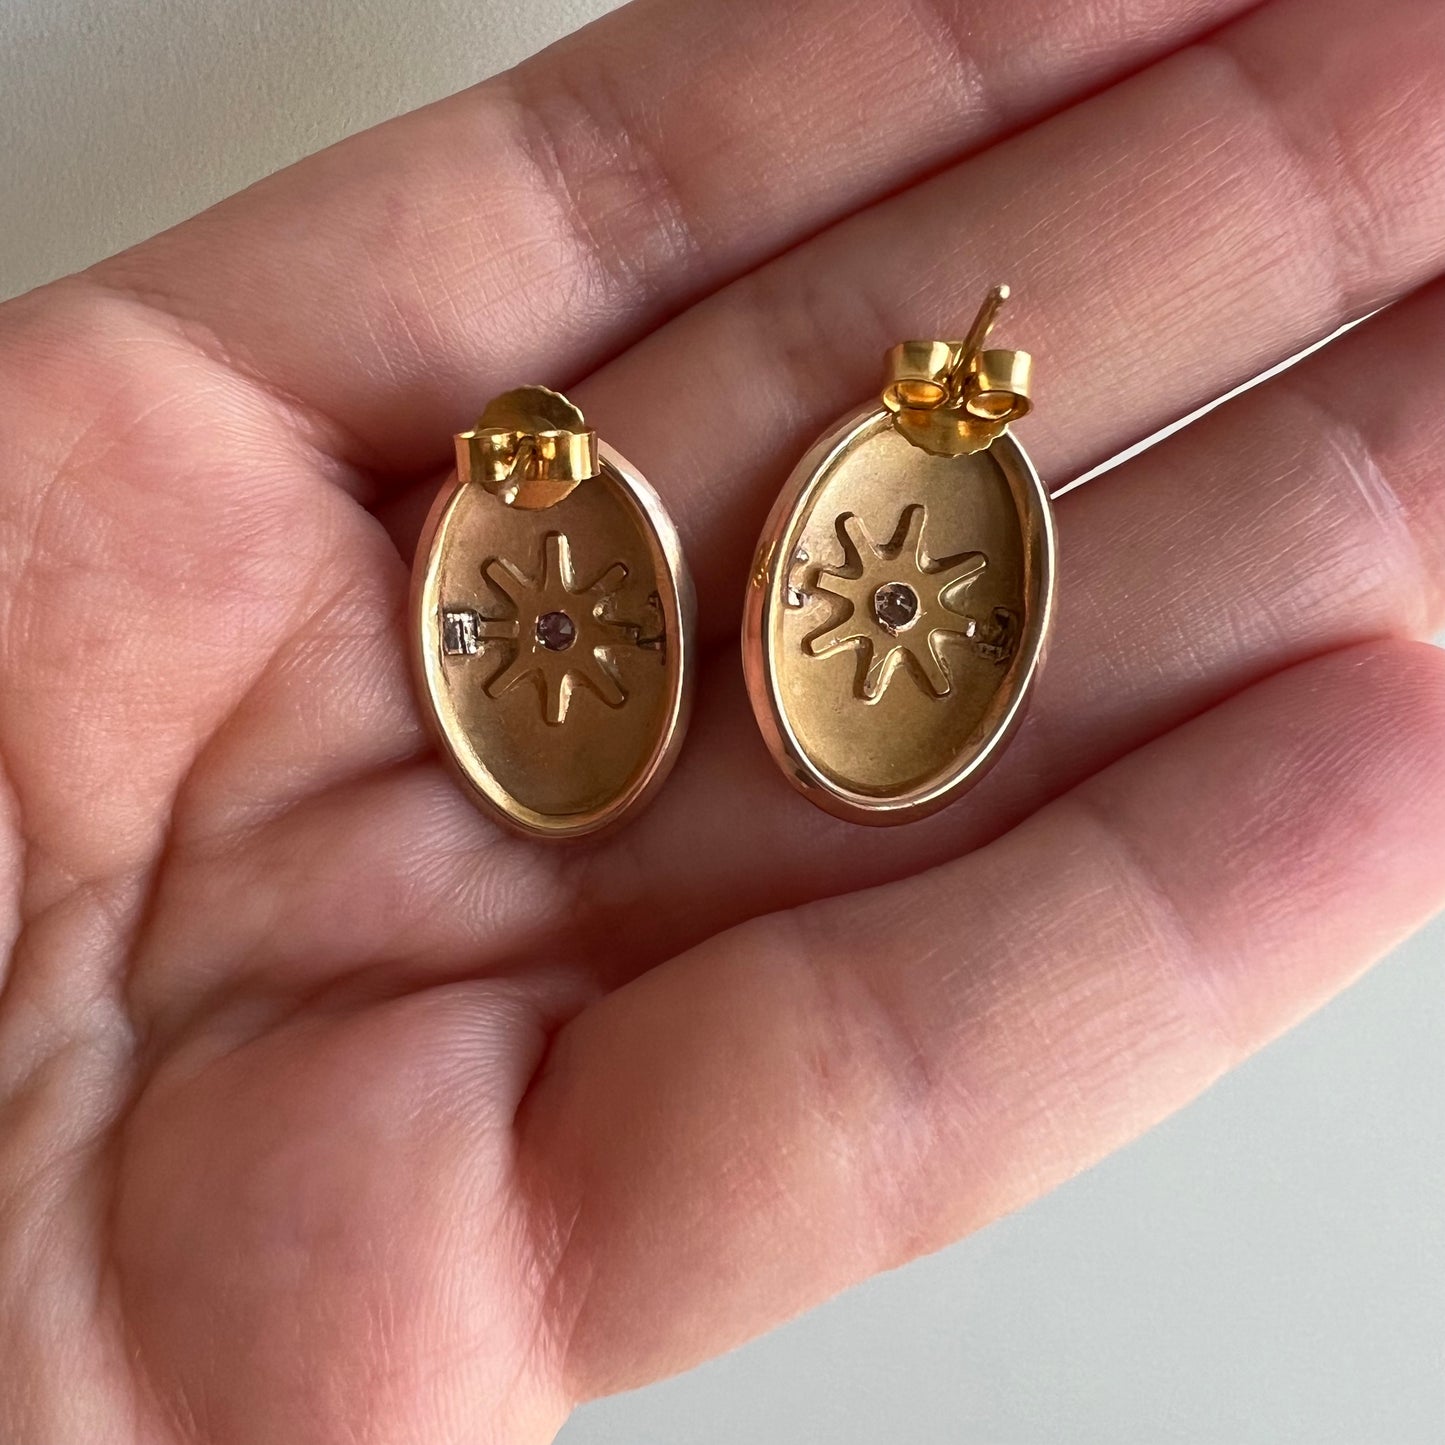 reimagined A N T I Q U E // 14k rosy yellow gold and diamond cufflink conversion post earrings